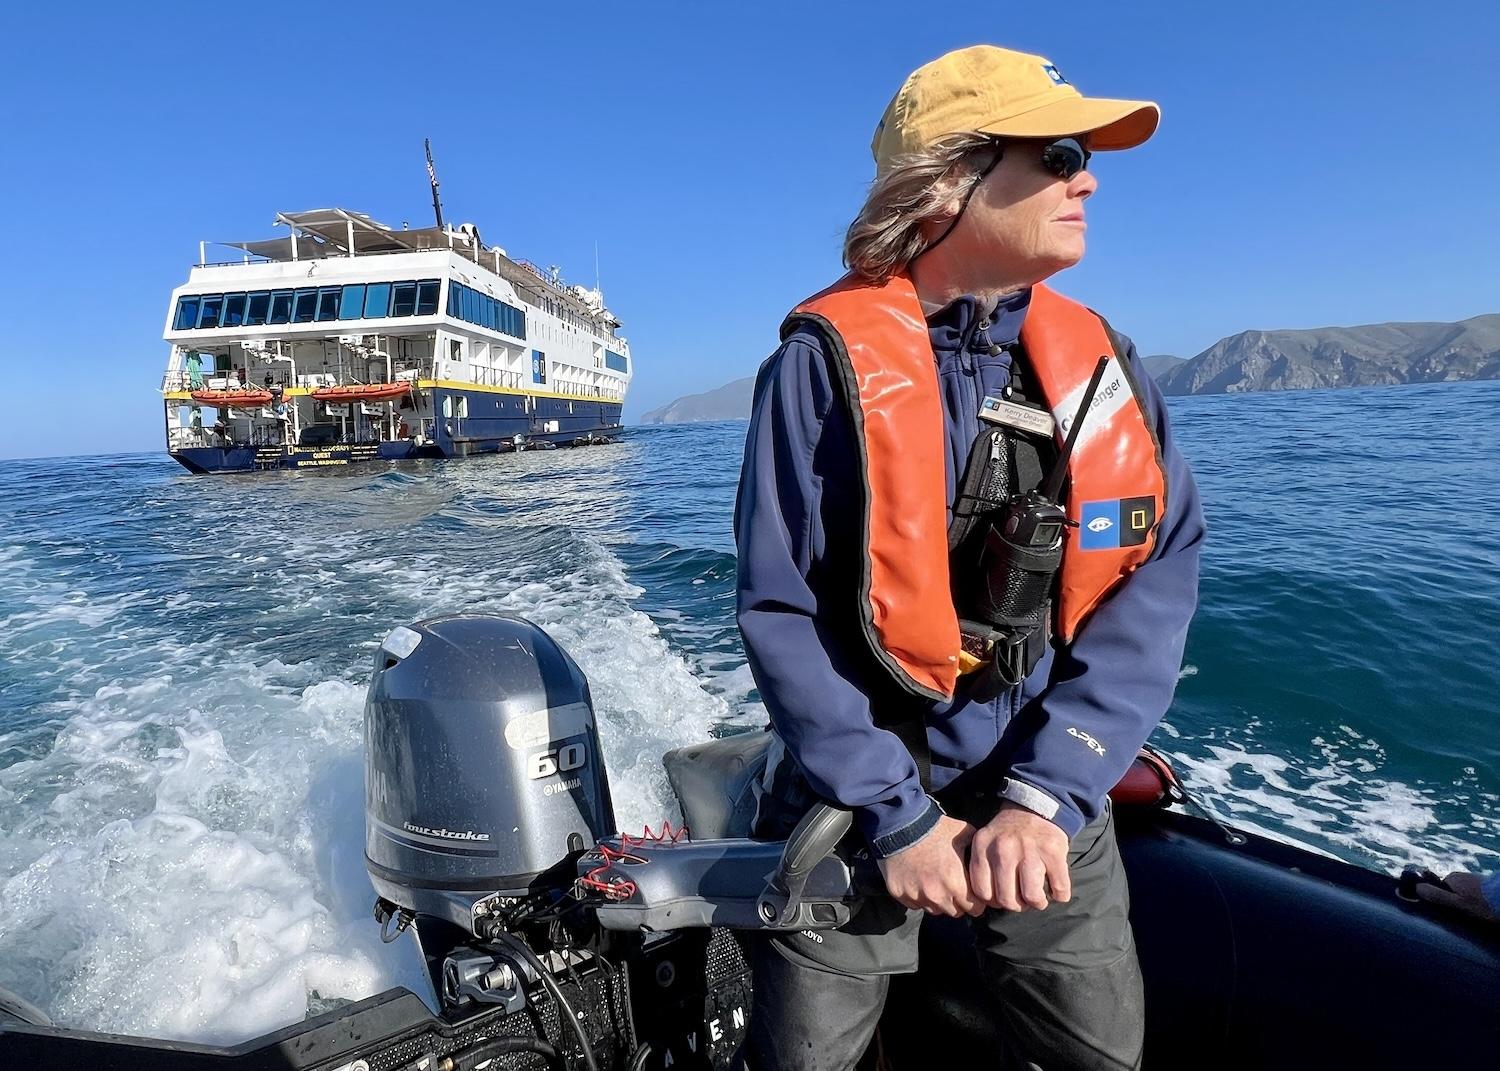 Kerry Deaver was one of Lindblad's expedition drivers when guests left the National Geographic Quest to explore on Zodiacs.